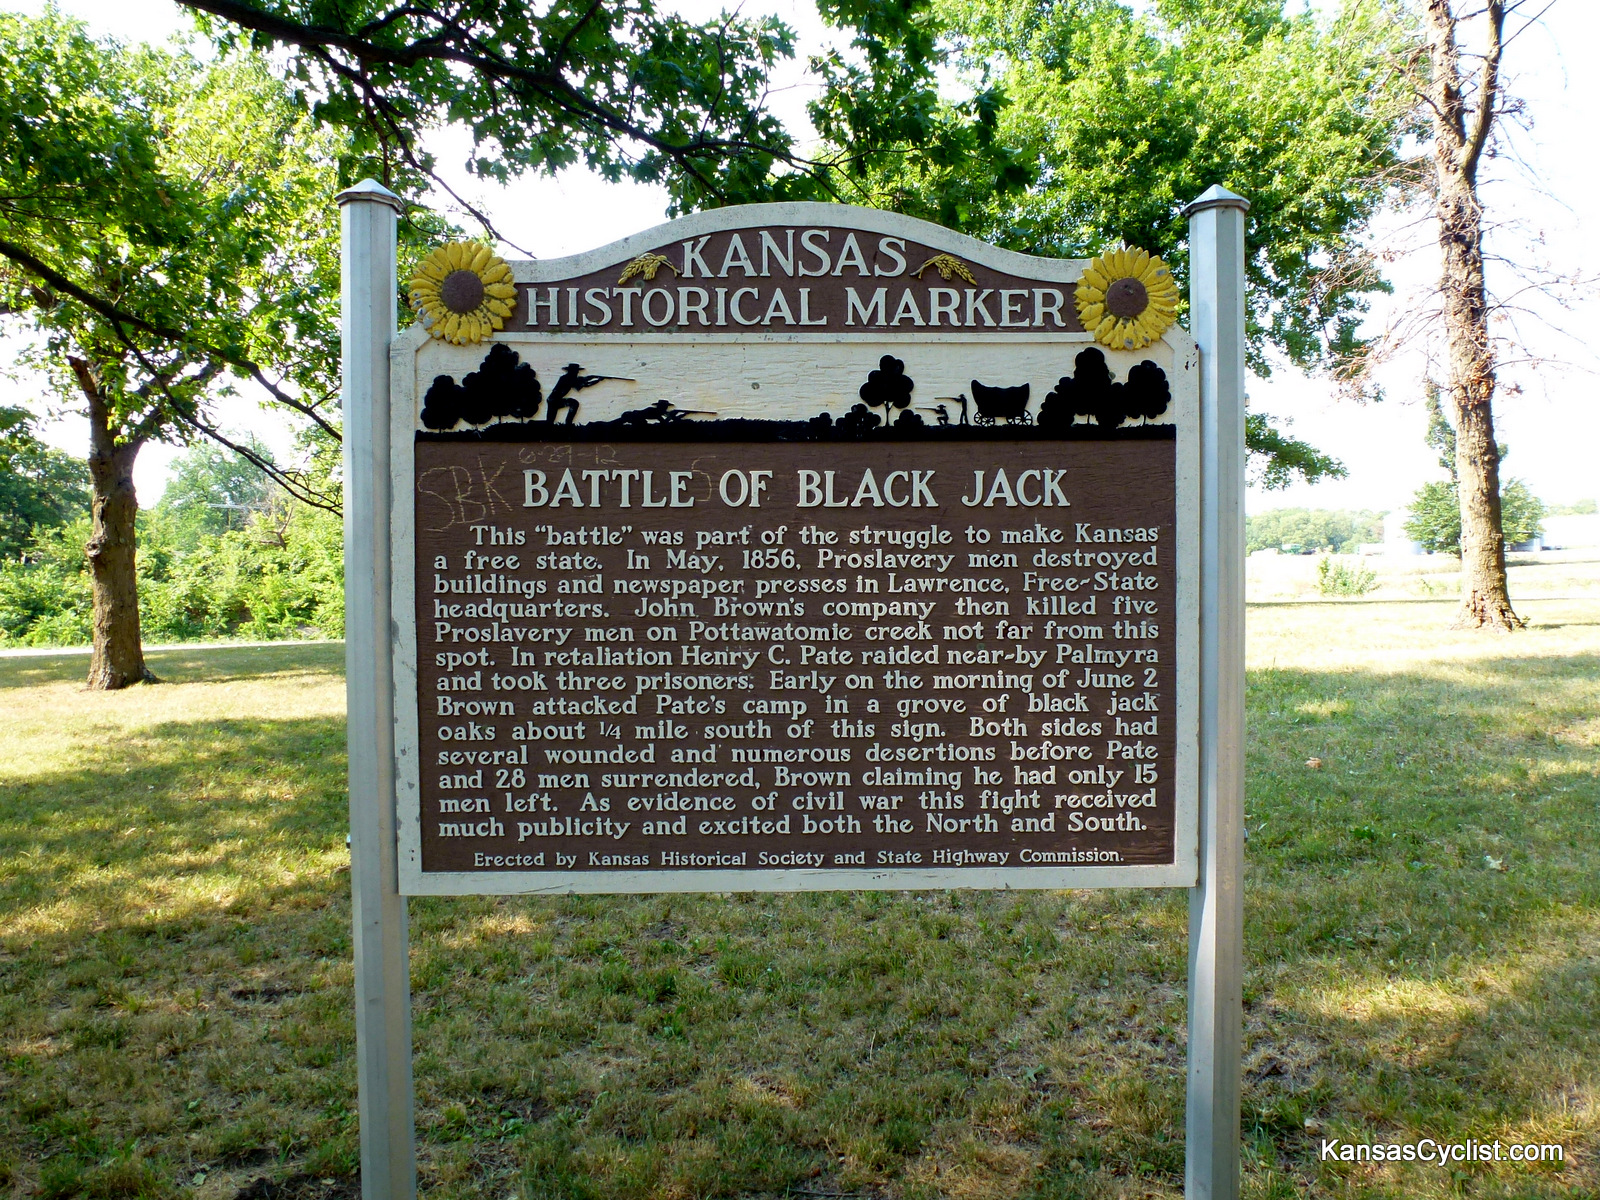 Photo Description: This is the historical marker at the Baldwin City Roadsi...